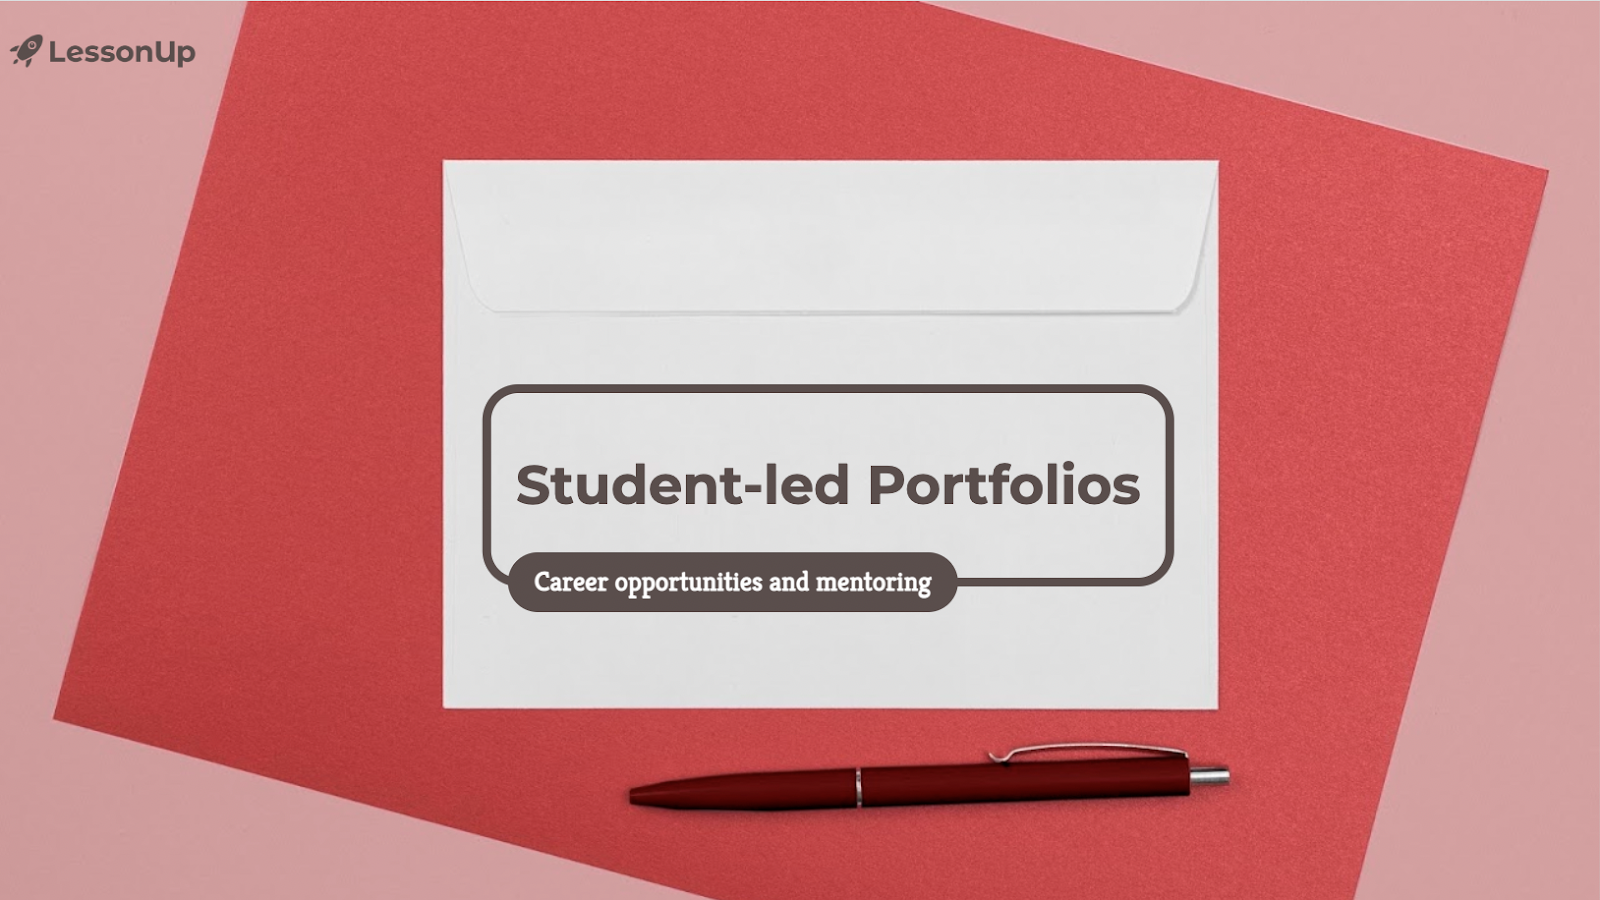 Student-led ePortfolios empower learners to showcase their progression & achievements, and provide insights into what they can achieve.